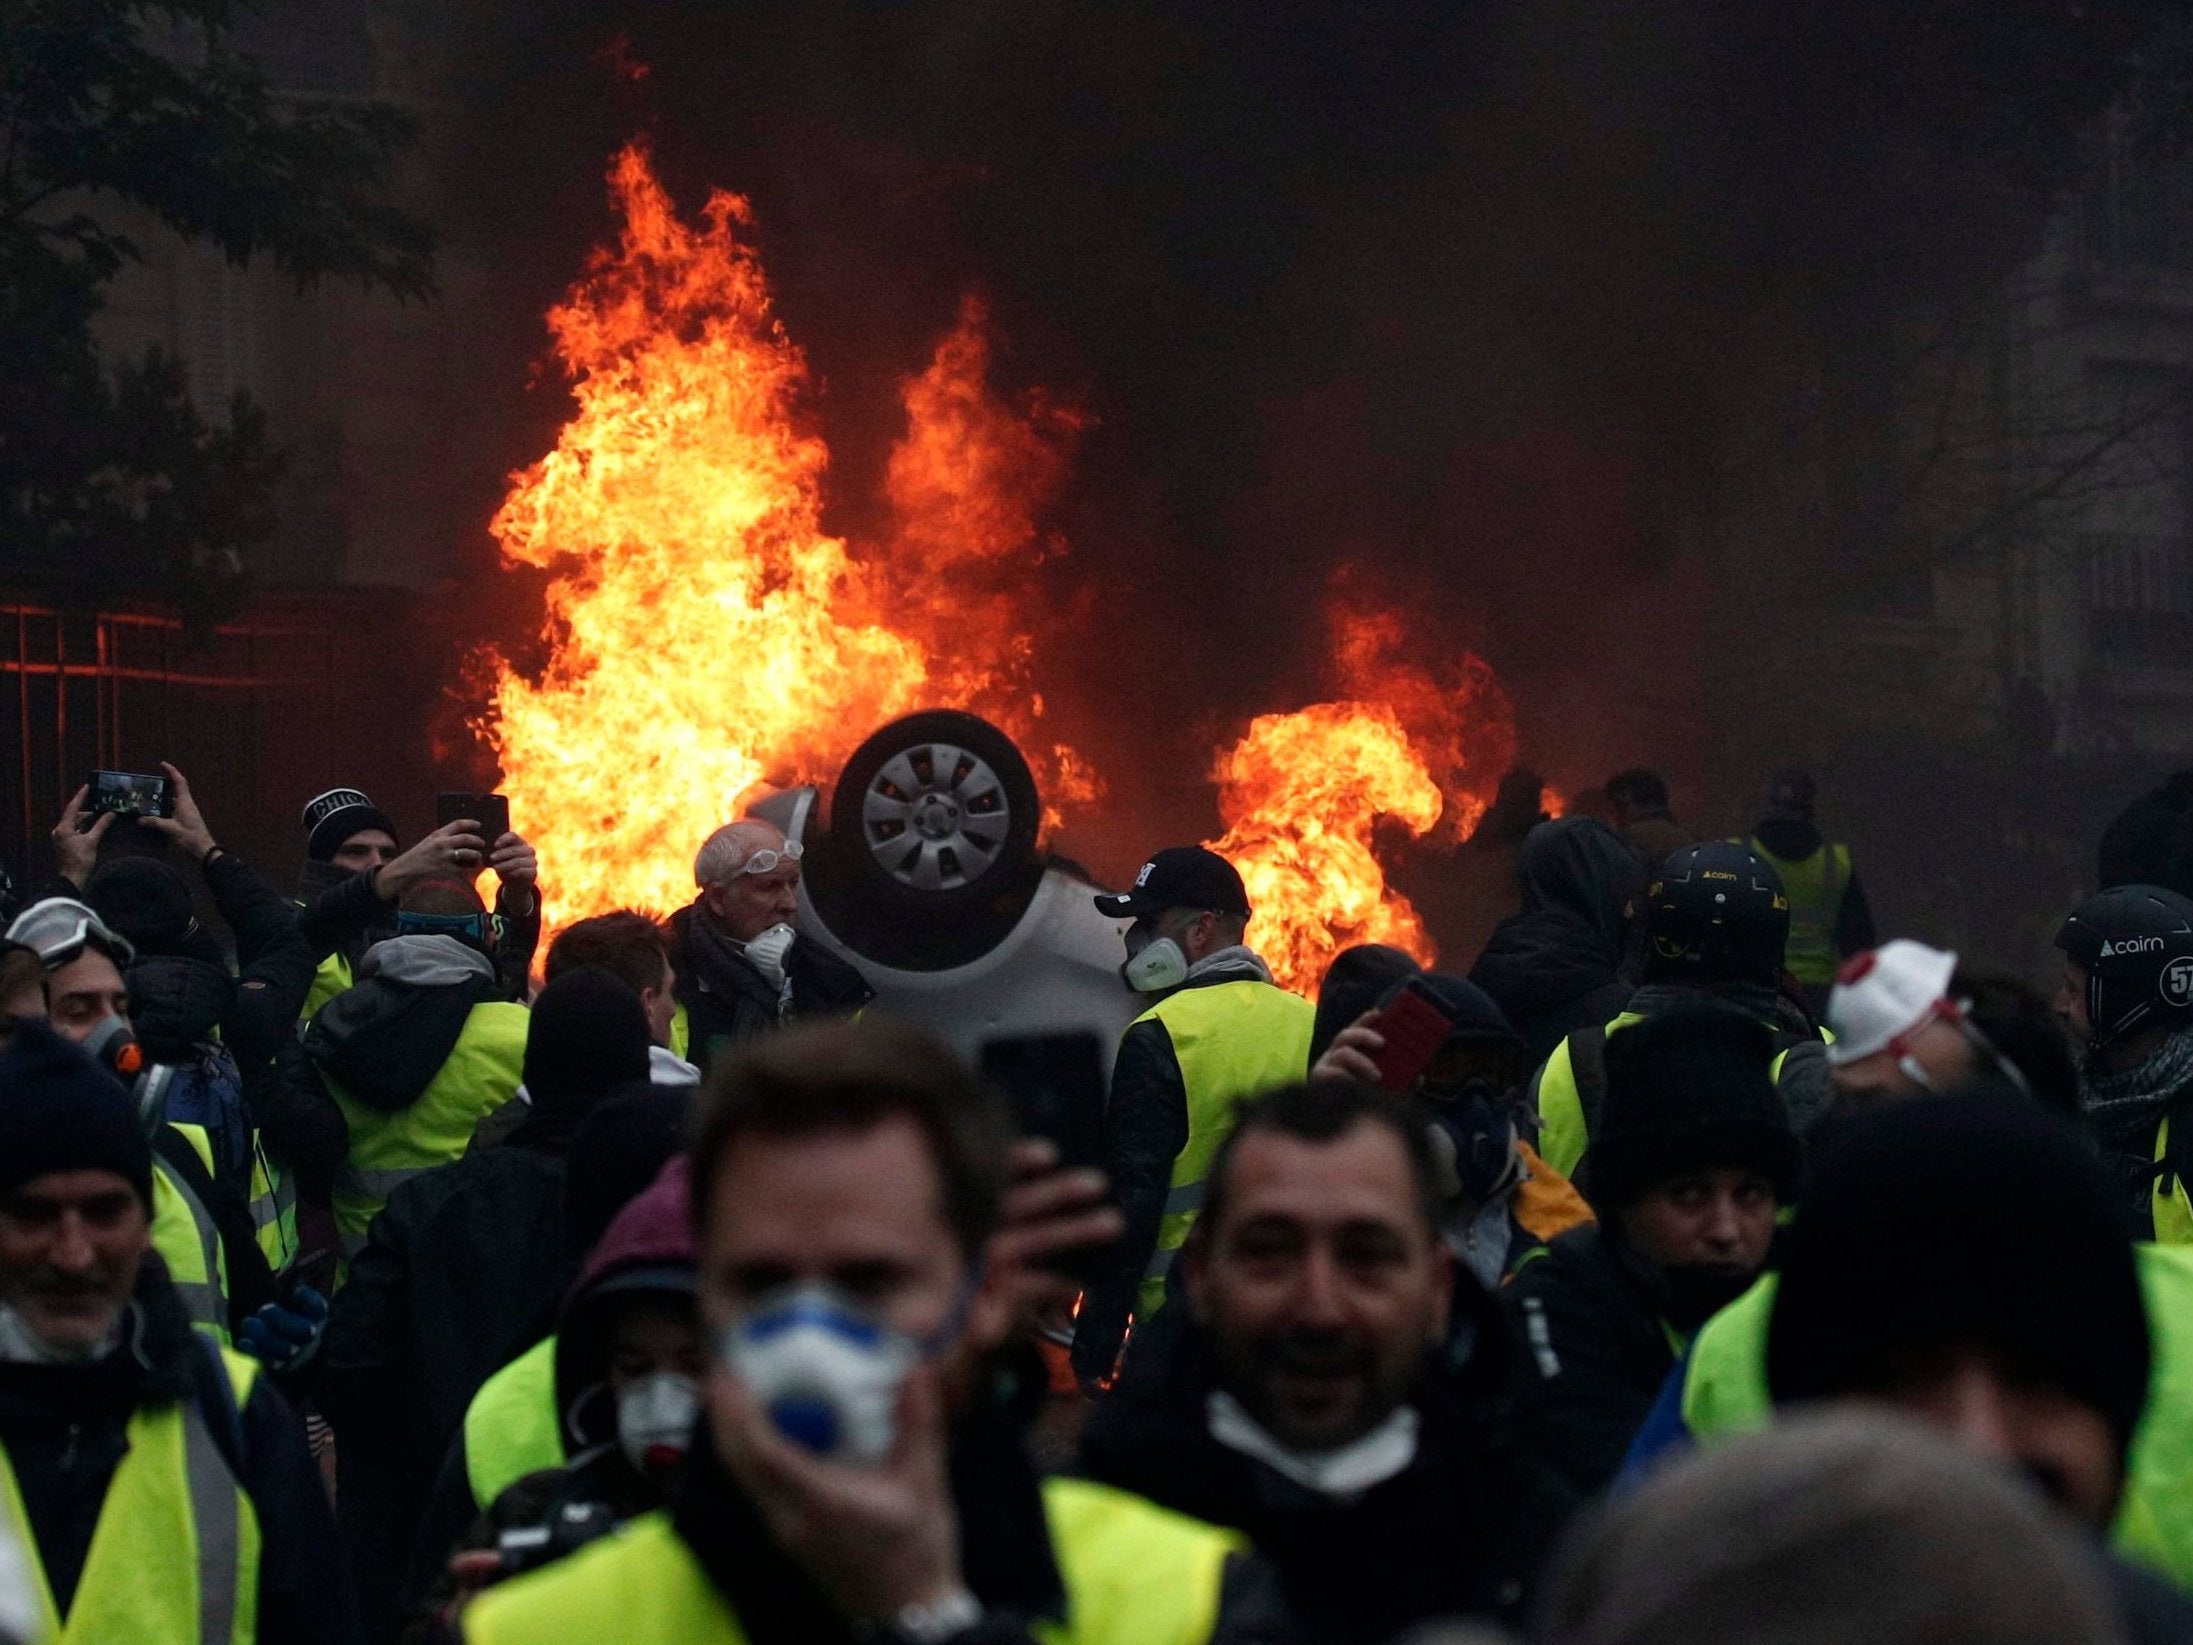 Cars burn as protesters wearing yellow vests (gilets jaunes) clash with riot police near the Arc de Triomphe